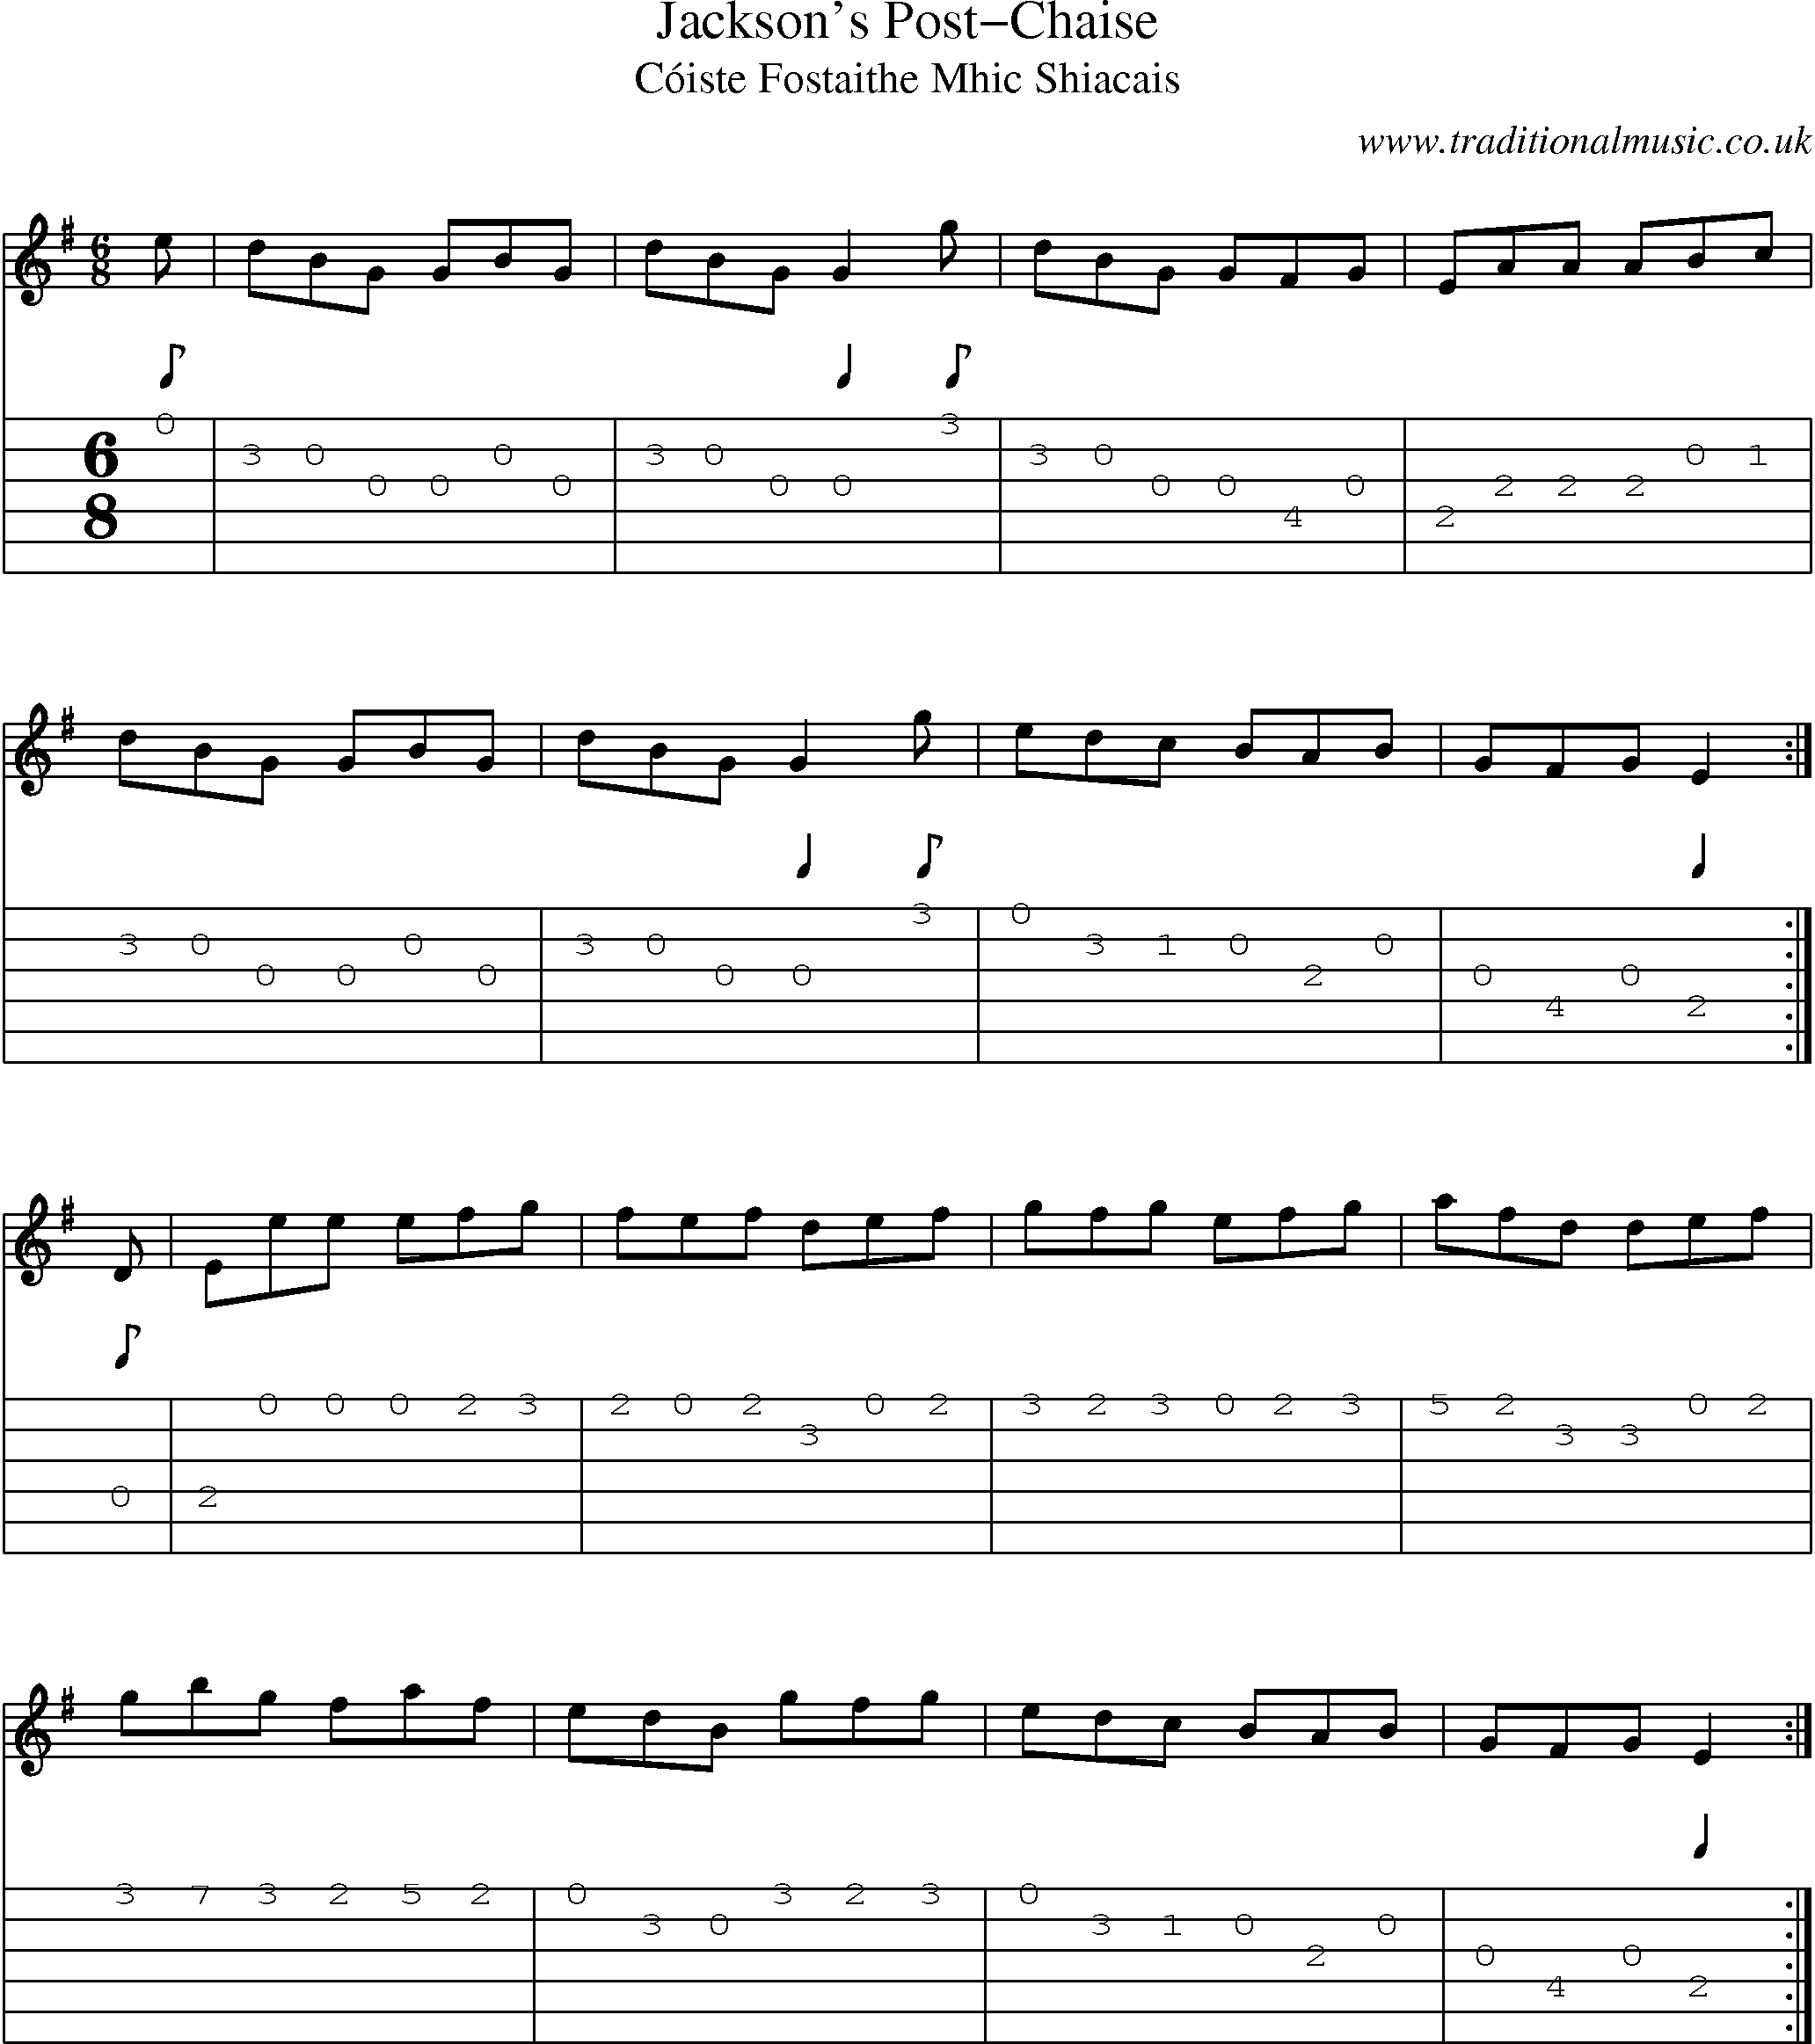 Music Score and Guitar Tabs for Jacksons Postchaise